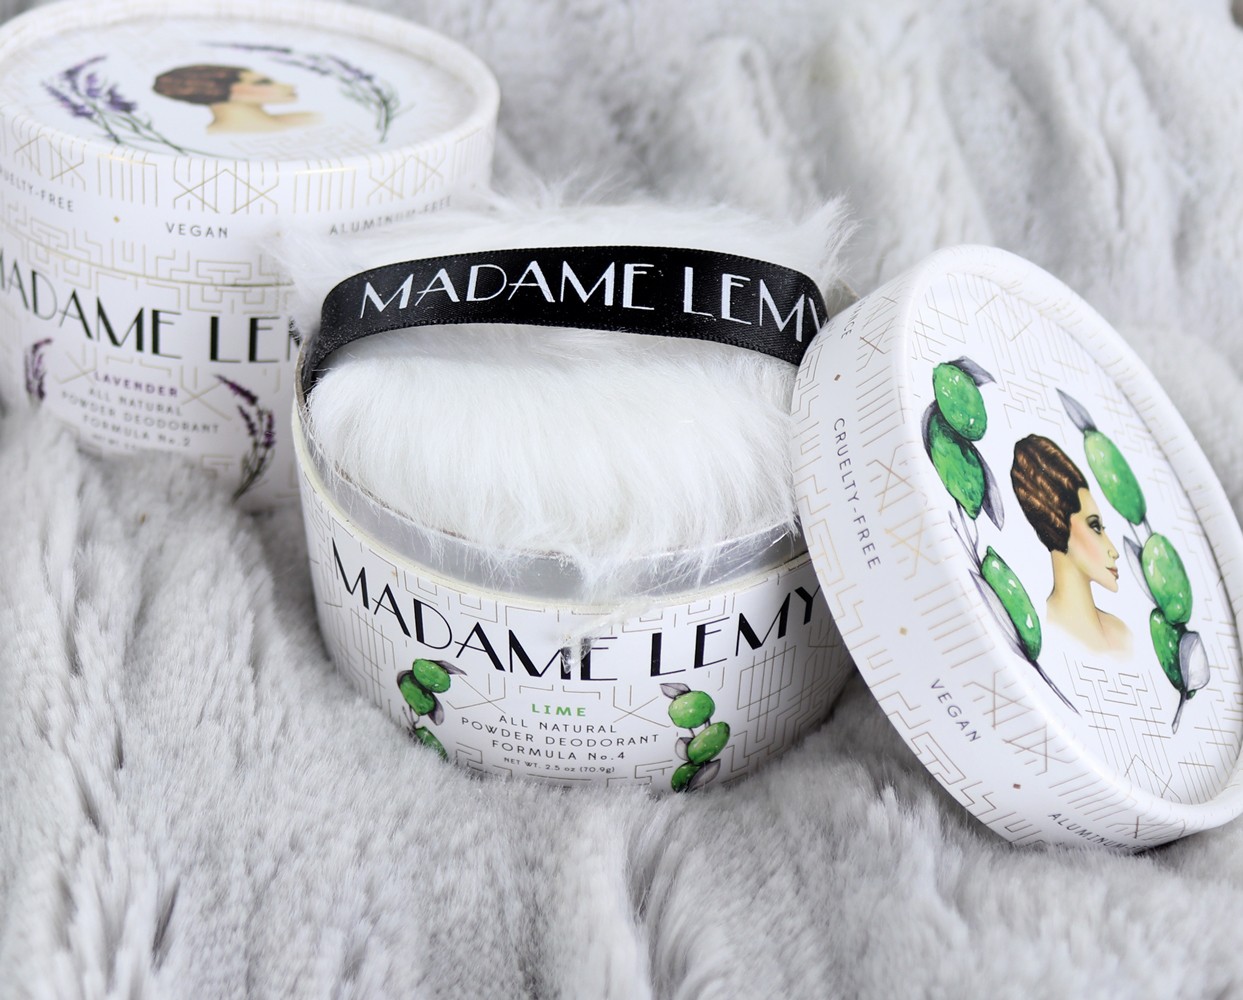 Madame Lemy Natural Deodorant Cruelty Free and Vegan - Cruelty Free Favorites for March by popular Los Angeles cruelty free beauty blogger My Beauty Bunny